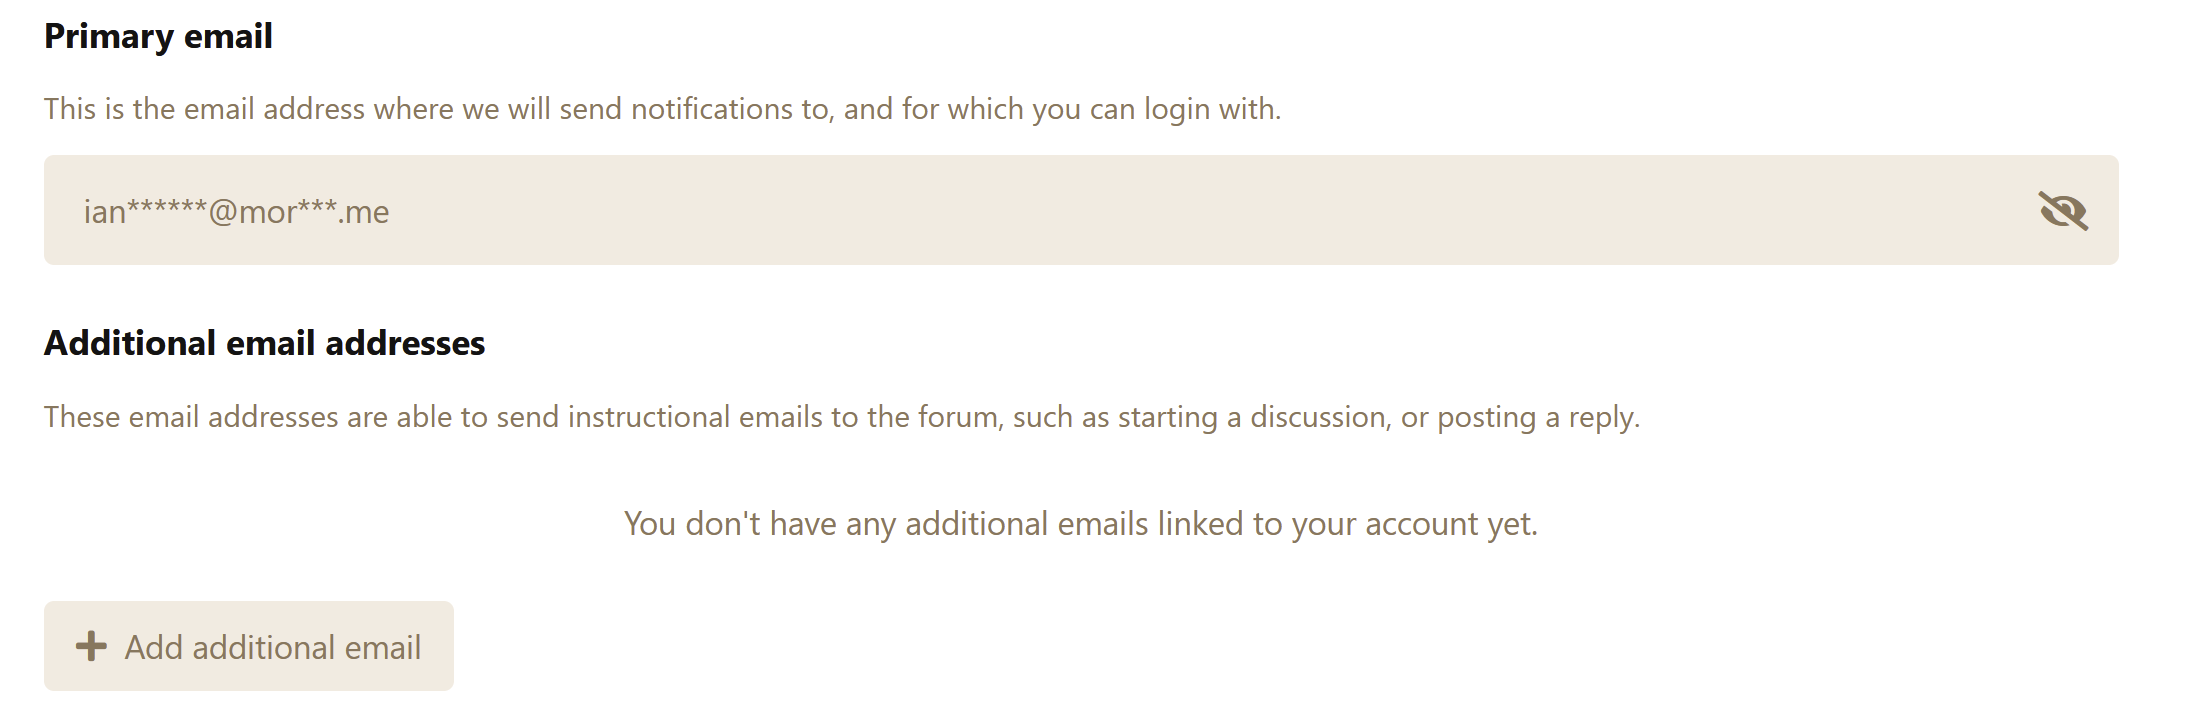 Additional email addresses in user settings